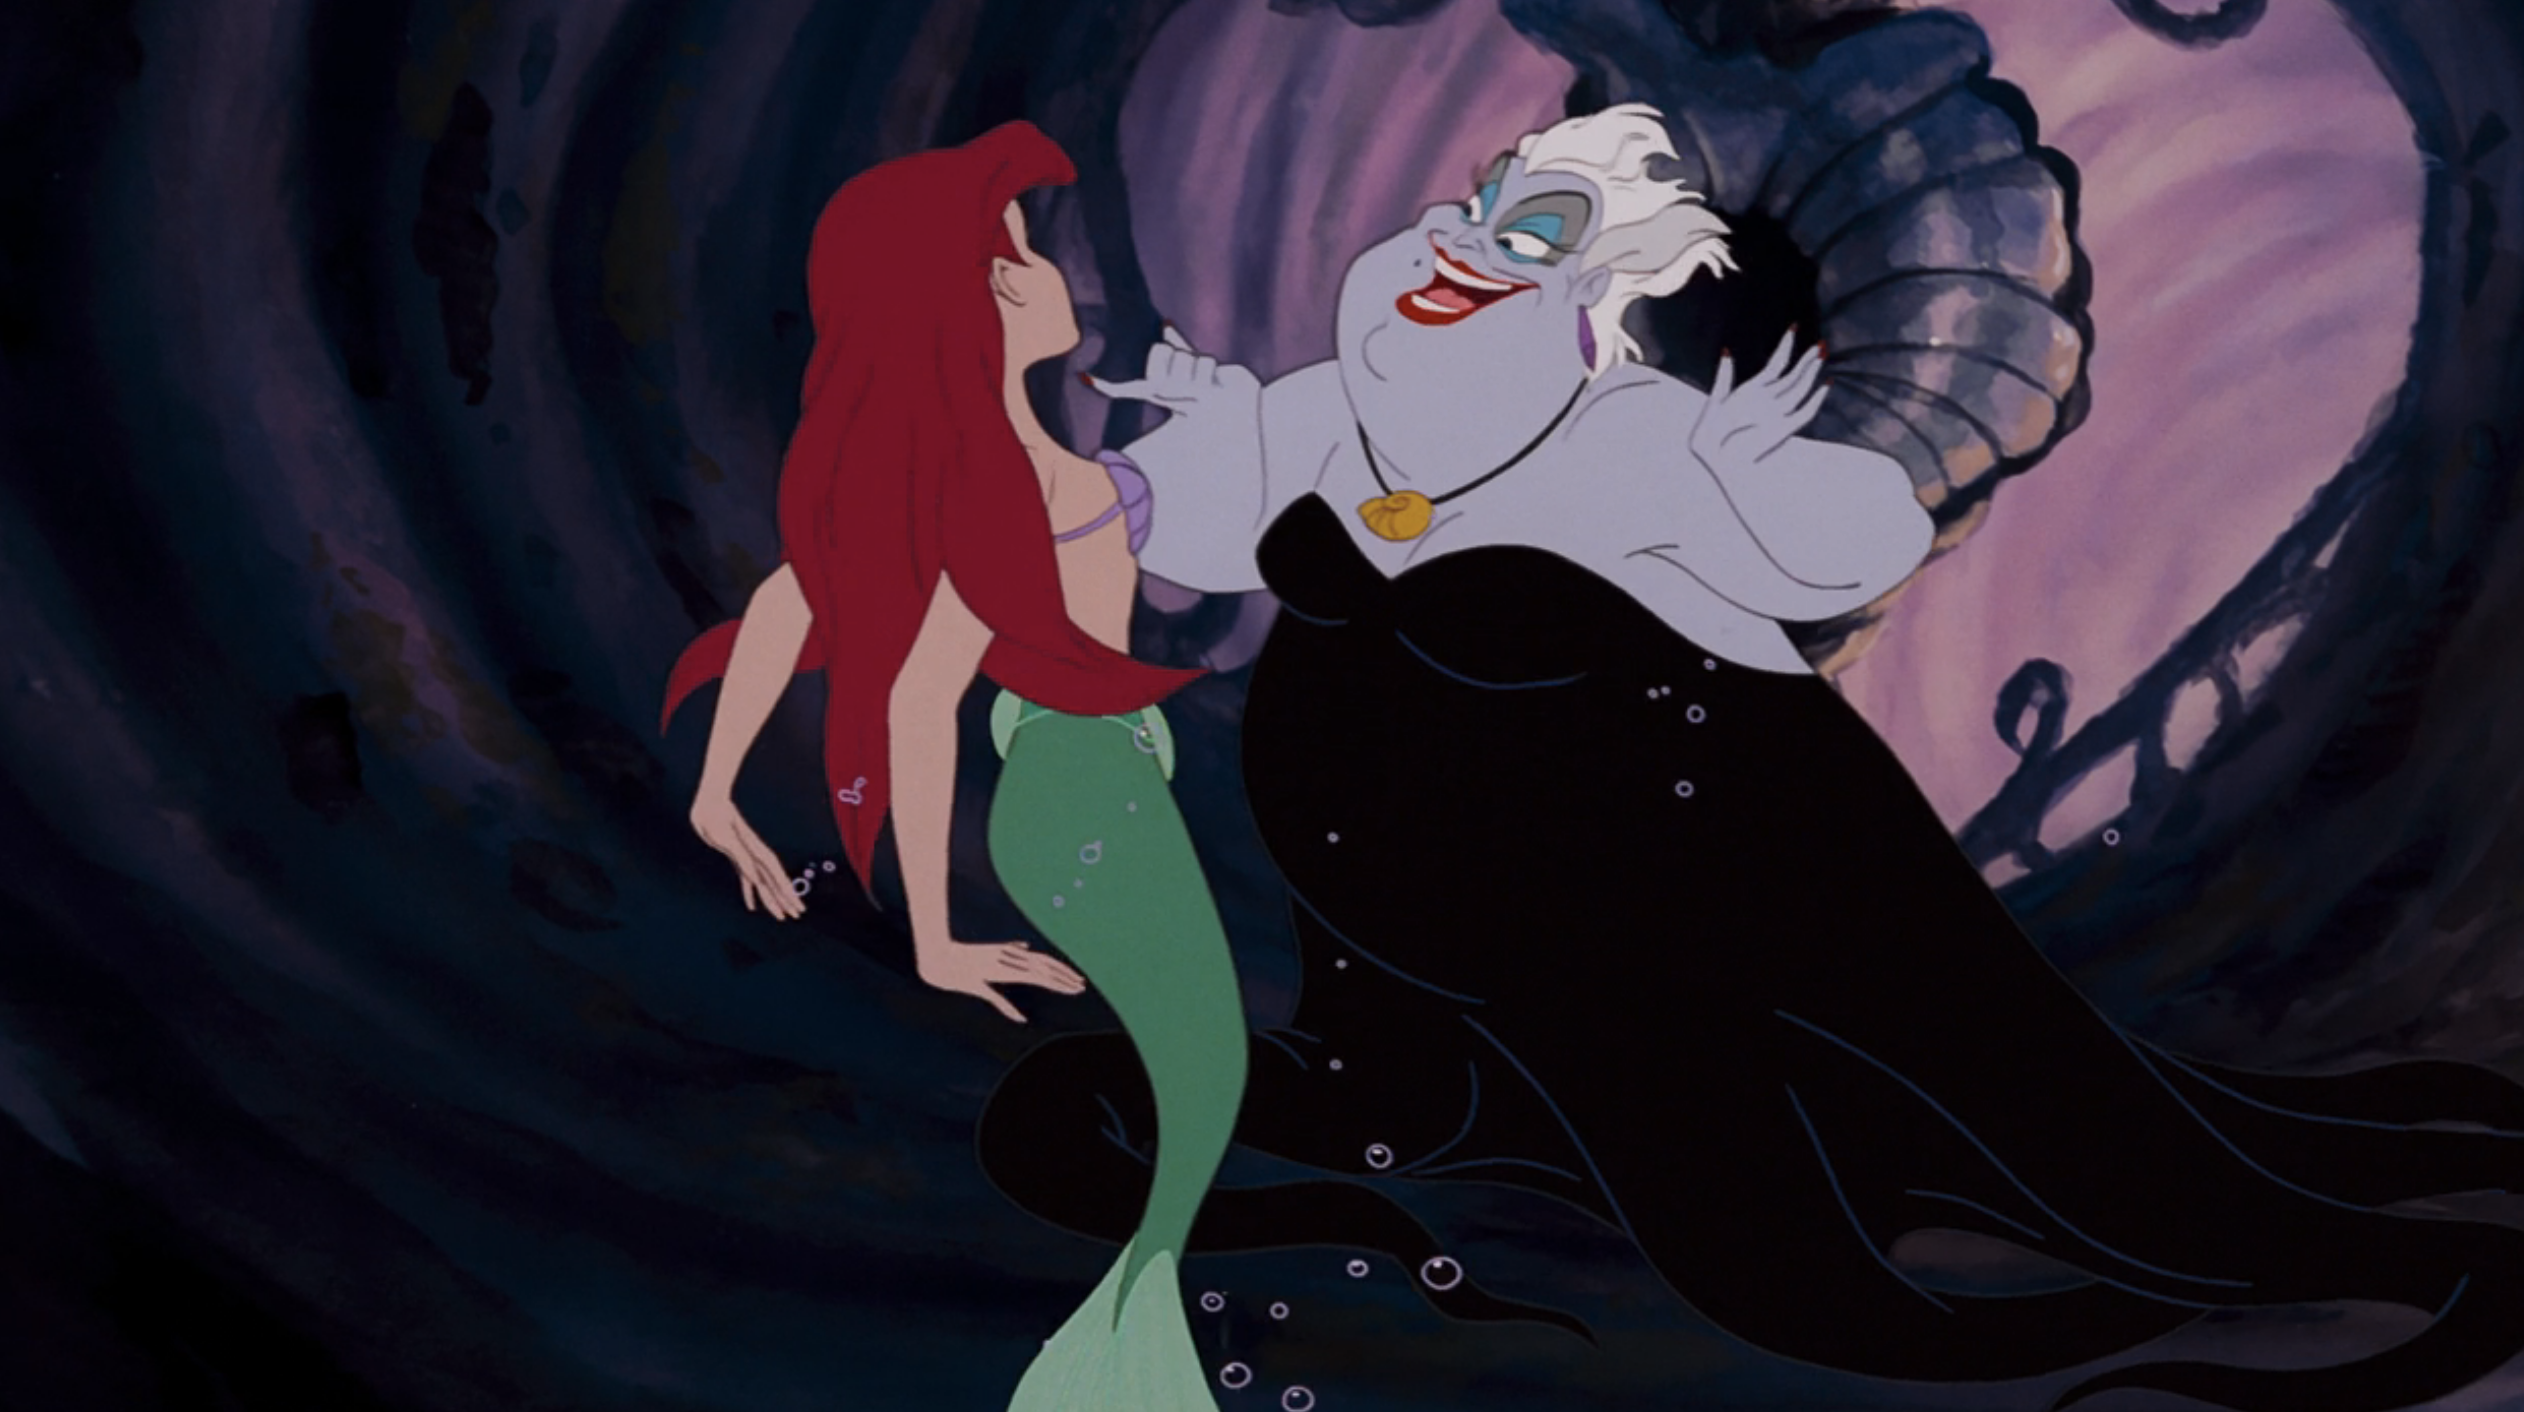 Screenshot from &quot;The Little Mermaid&quot;